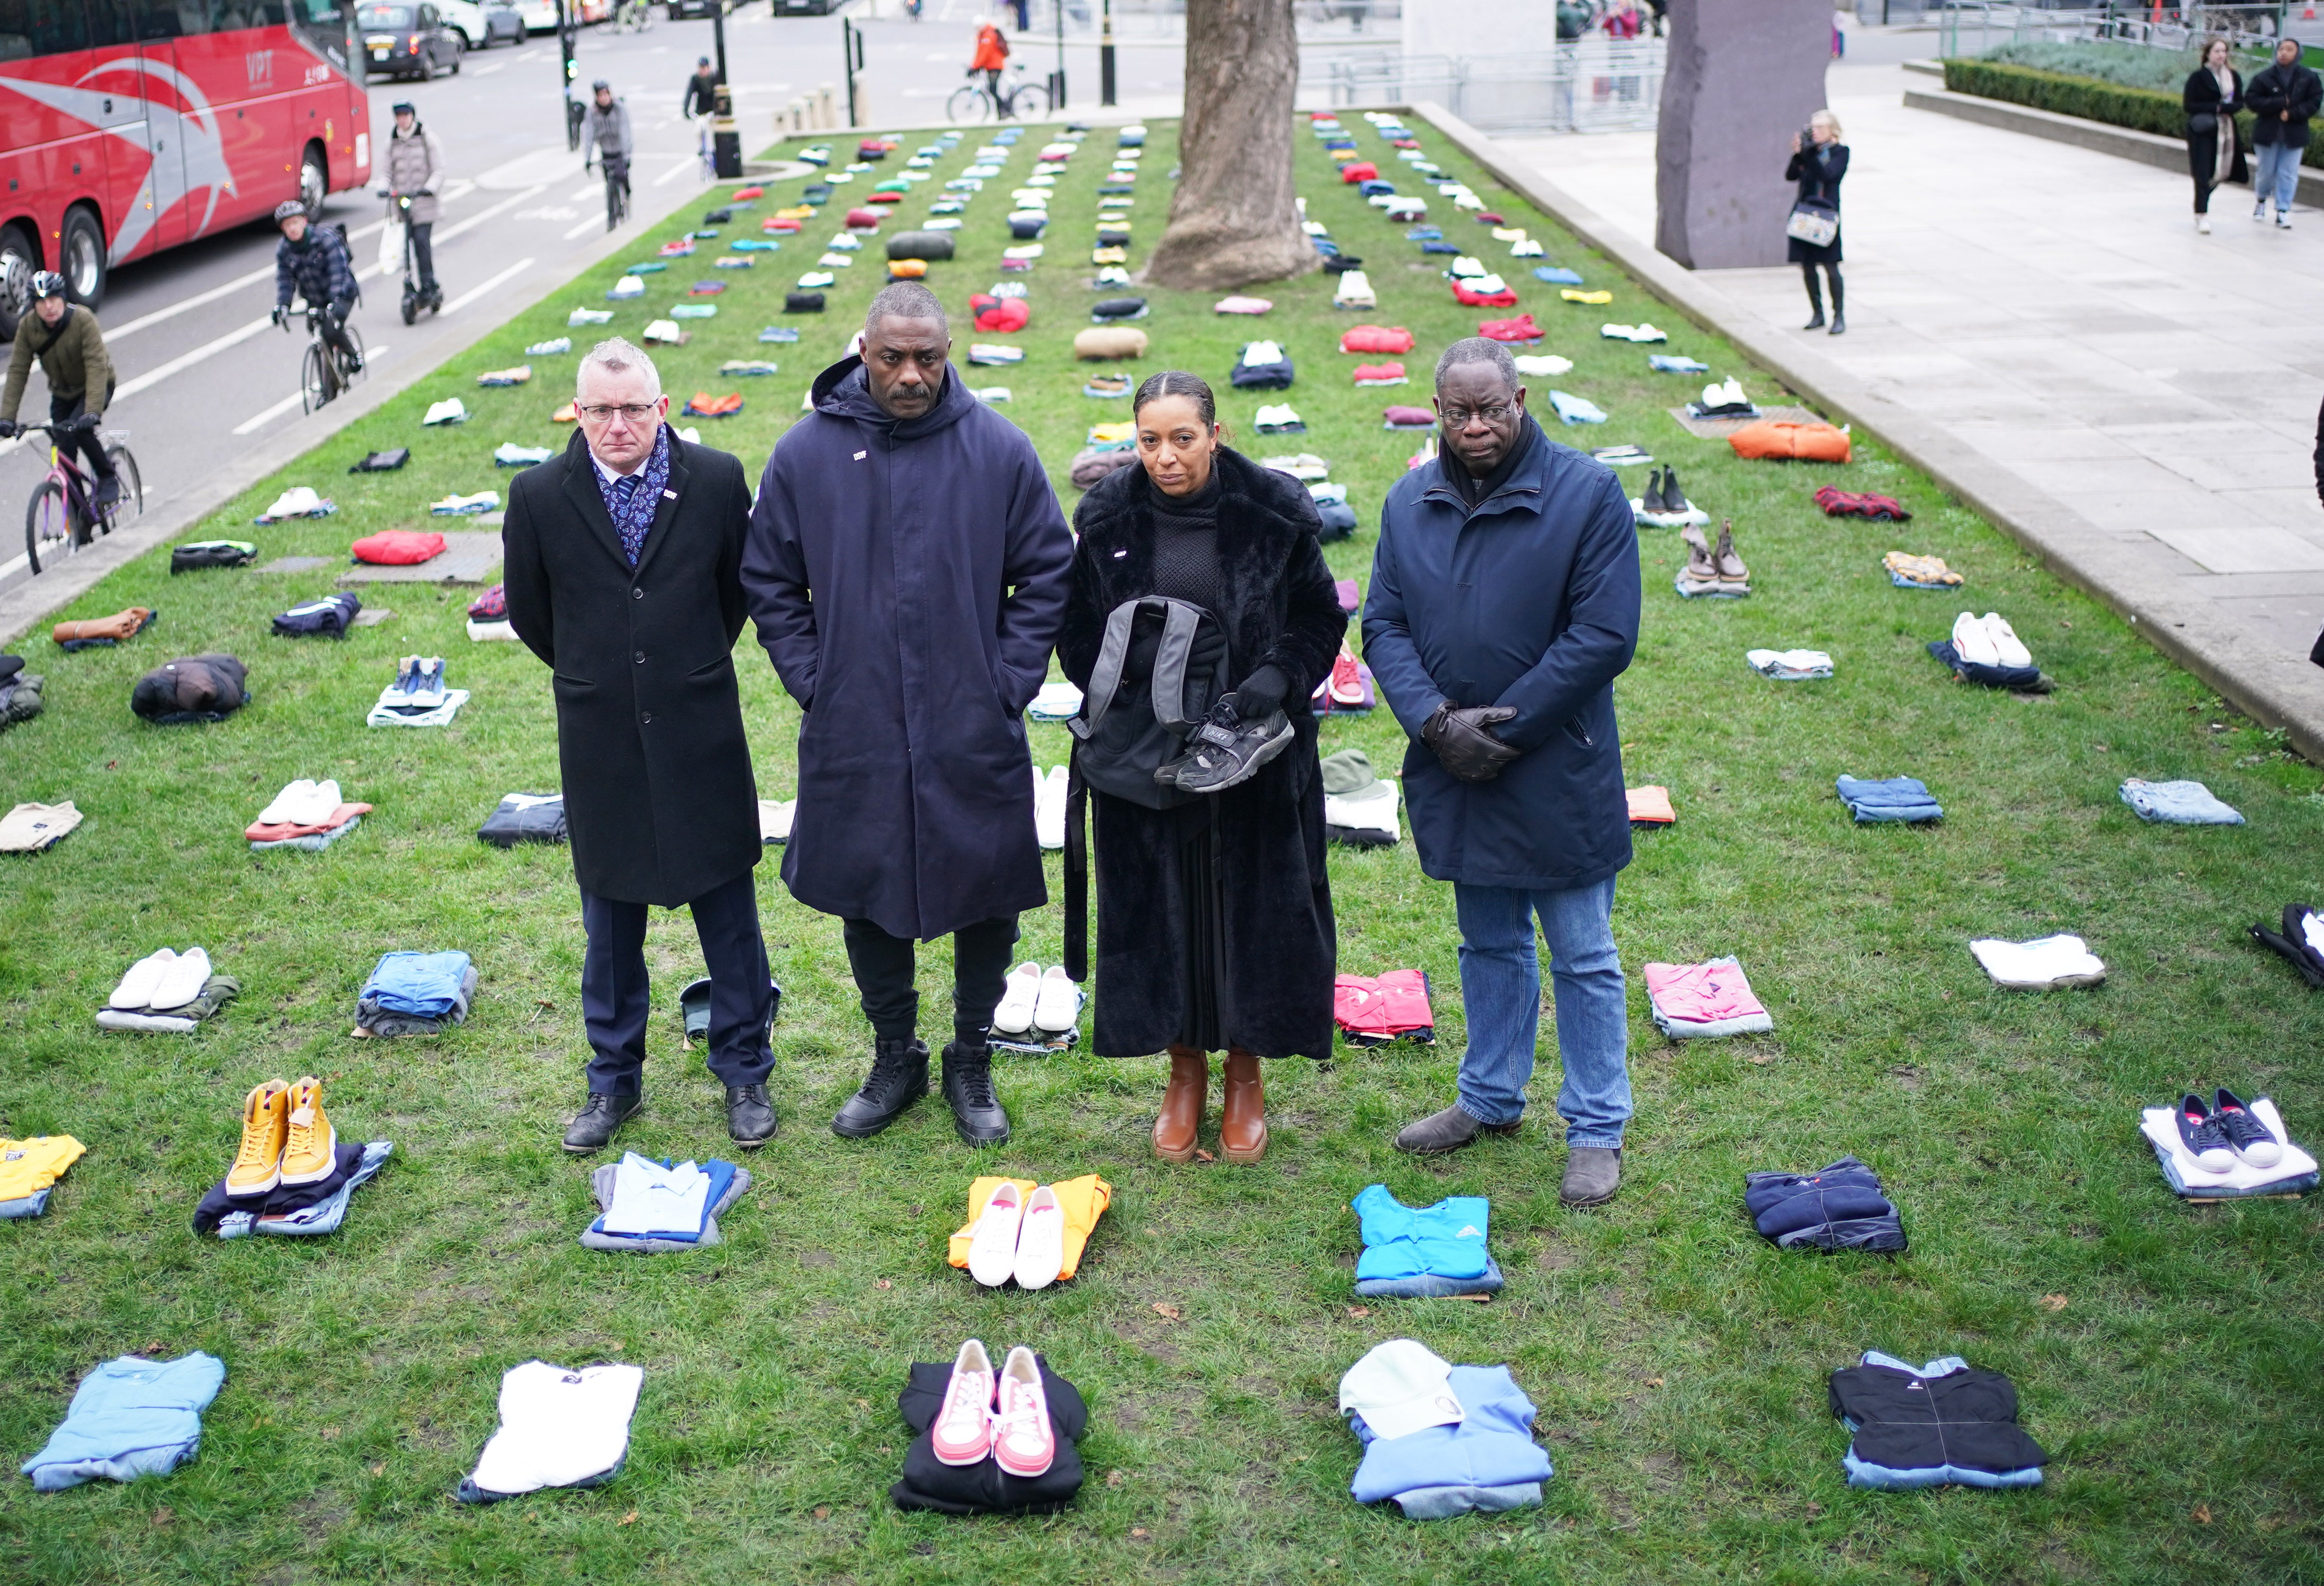 Patrick Green (left), Yemi Hughes, and Bishop Nicholson (right) join Idris Elba during the launch of his Don’t Stop Your Future campaign in Parliament Square, Westminster